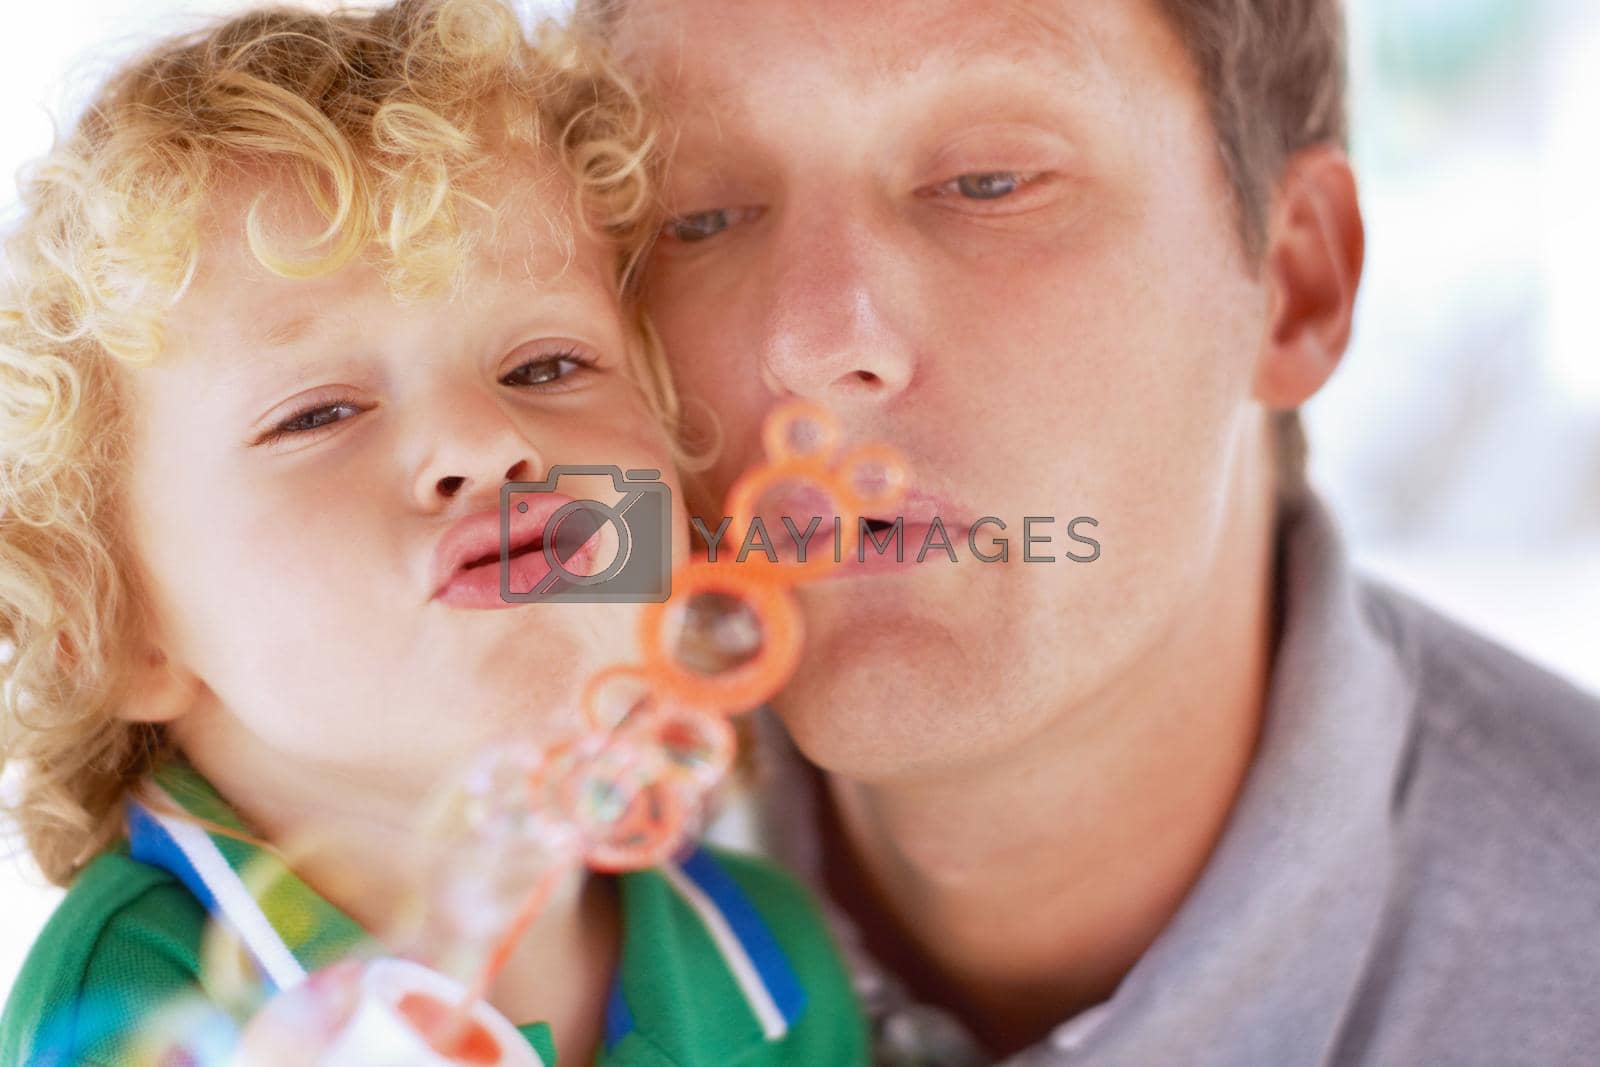 A father and son blowing bubbles together.